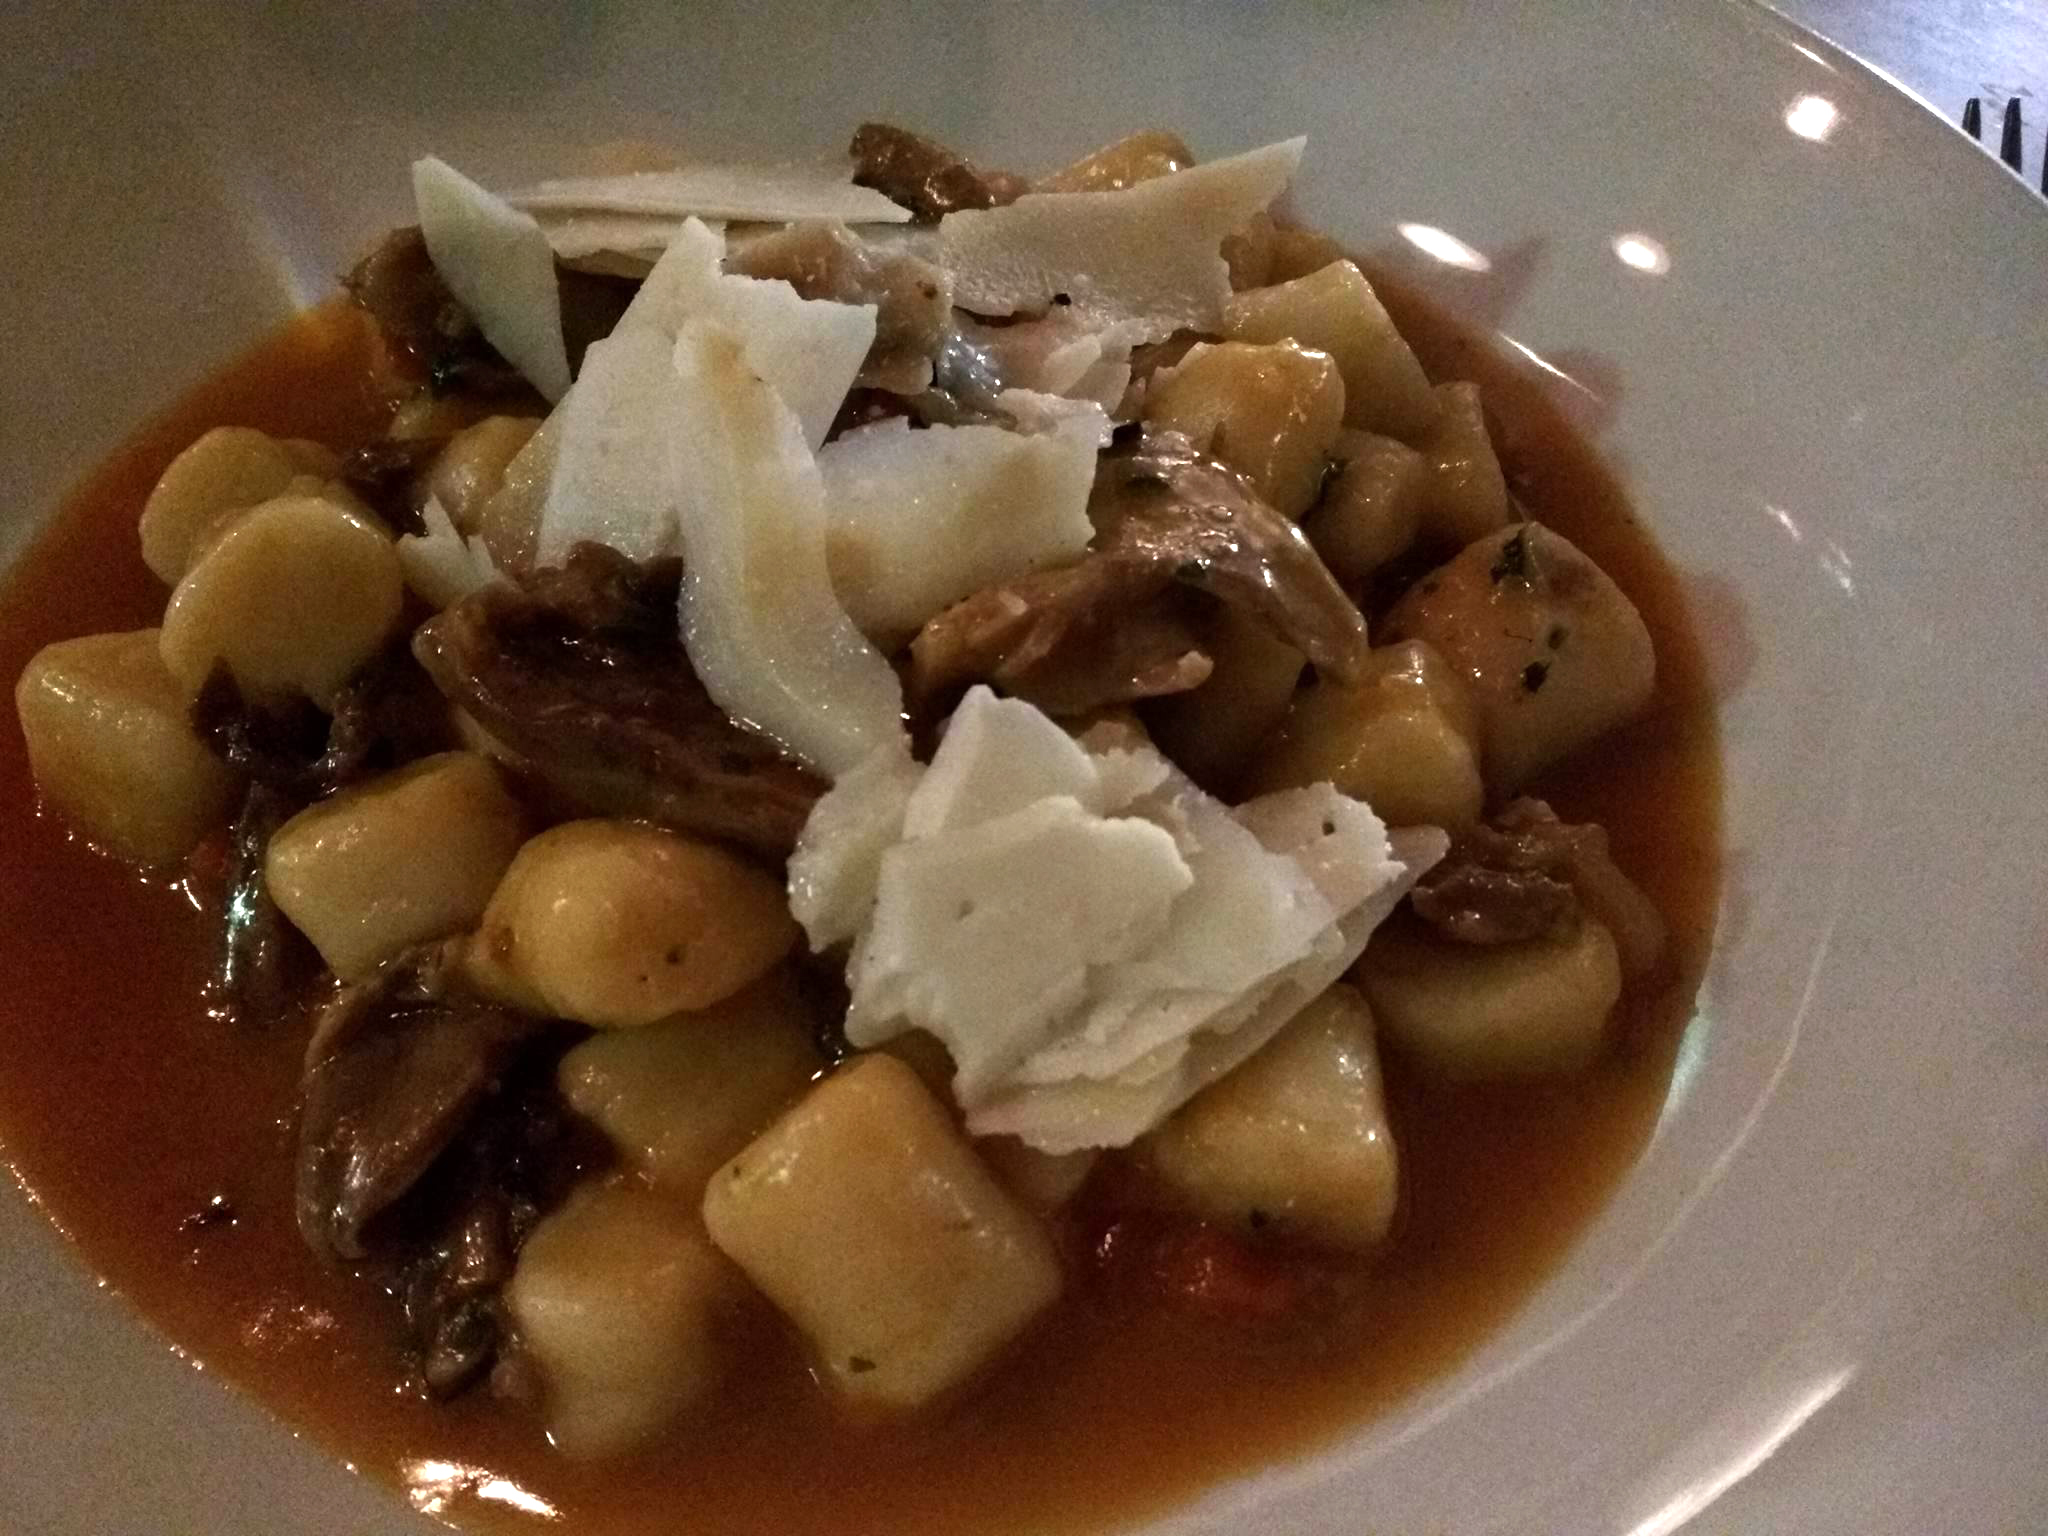 Gnocchi and braised duck breast with shaved Parmesan in  porchini mushroom sauce.